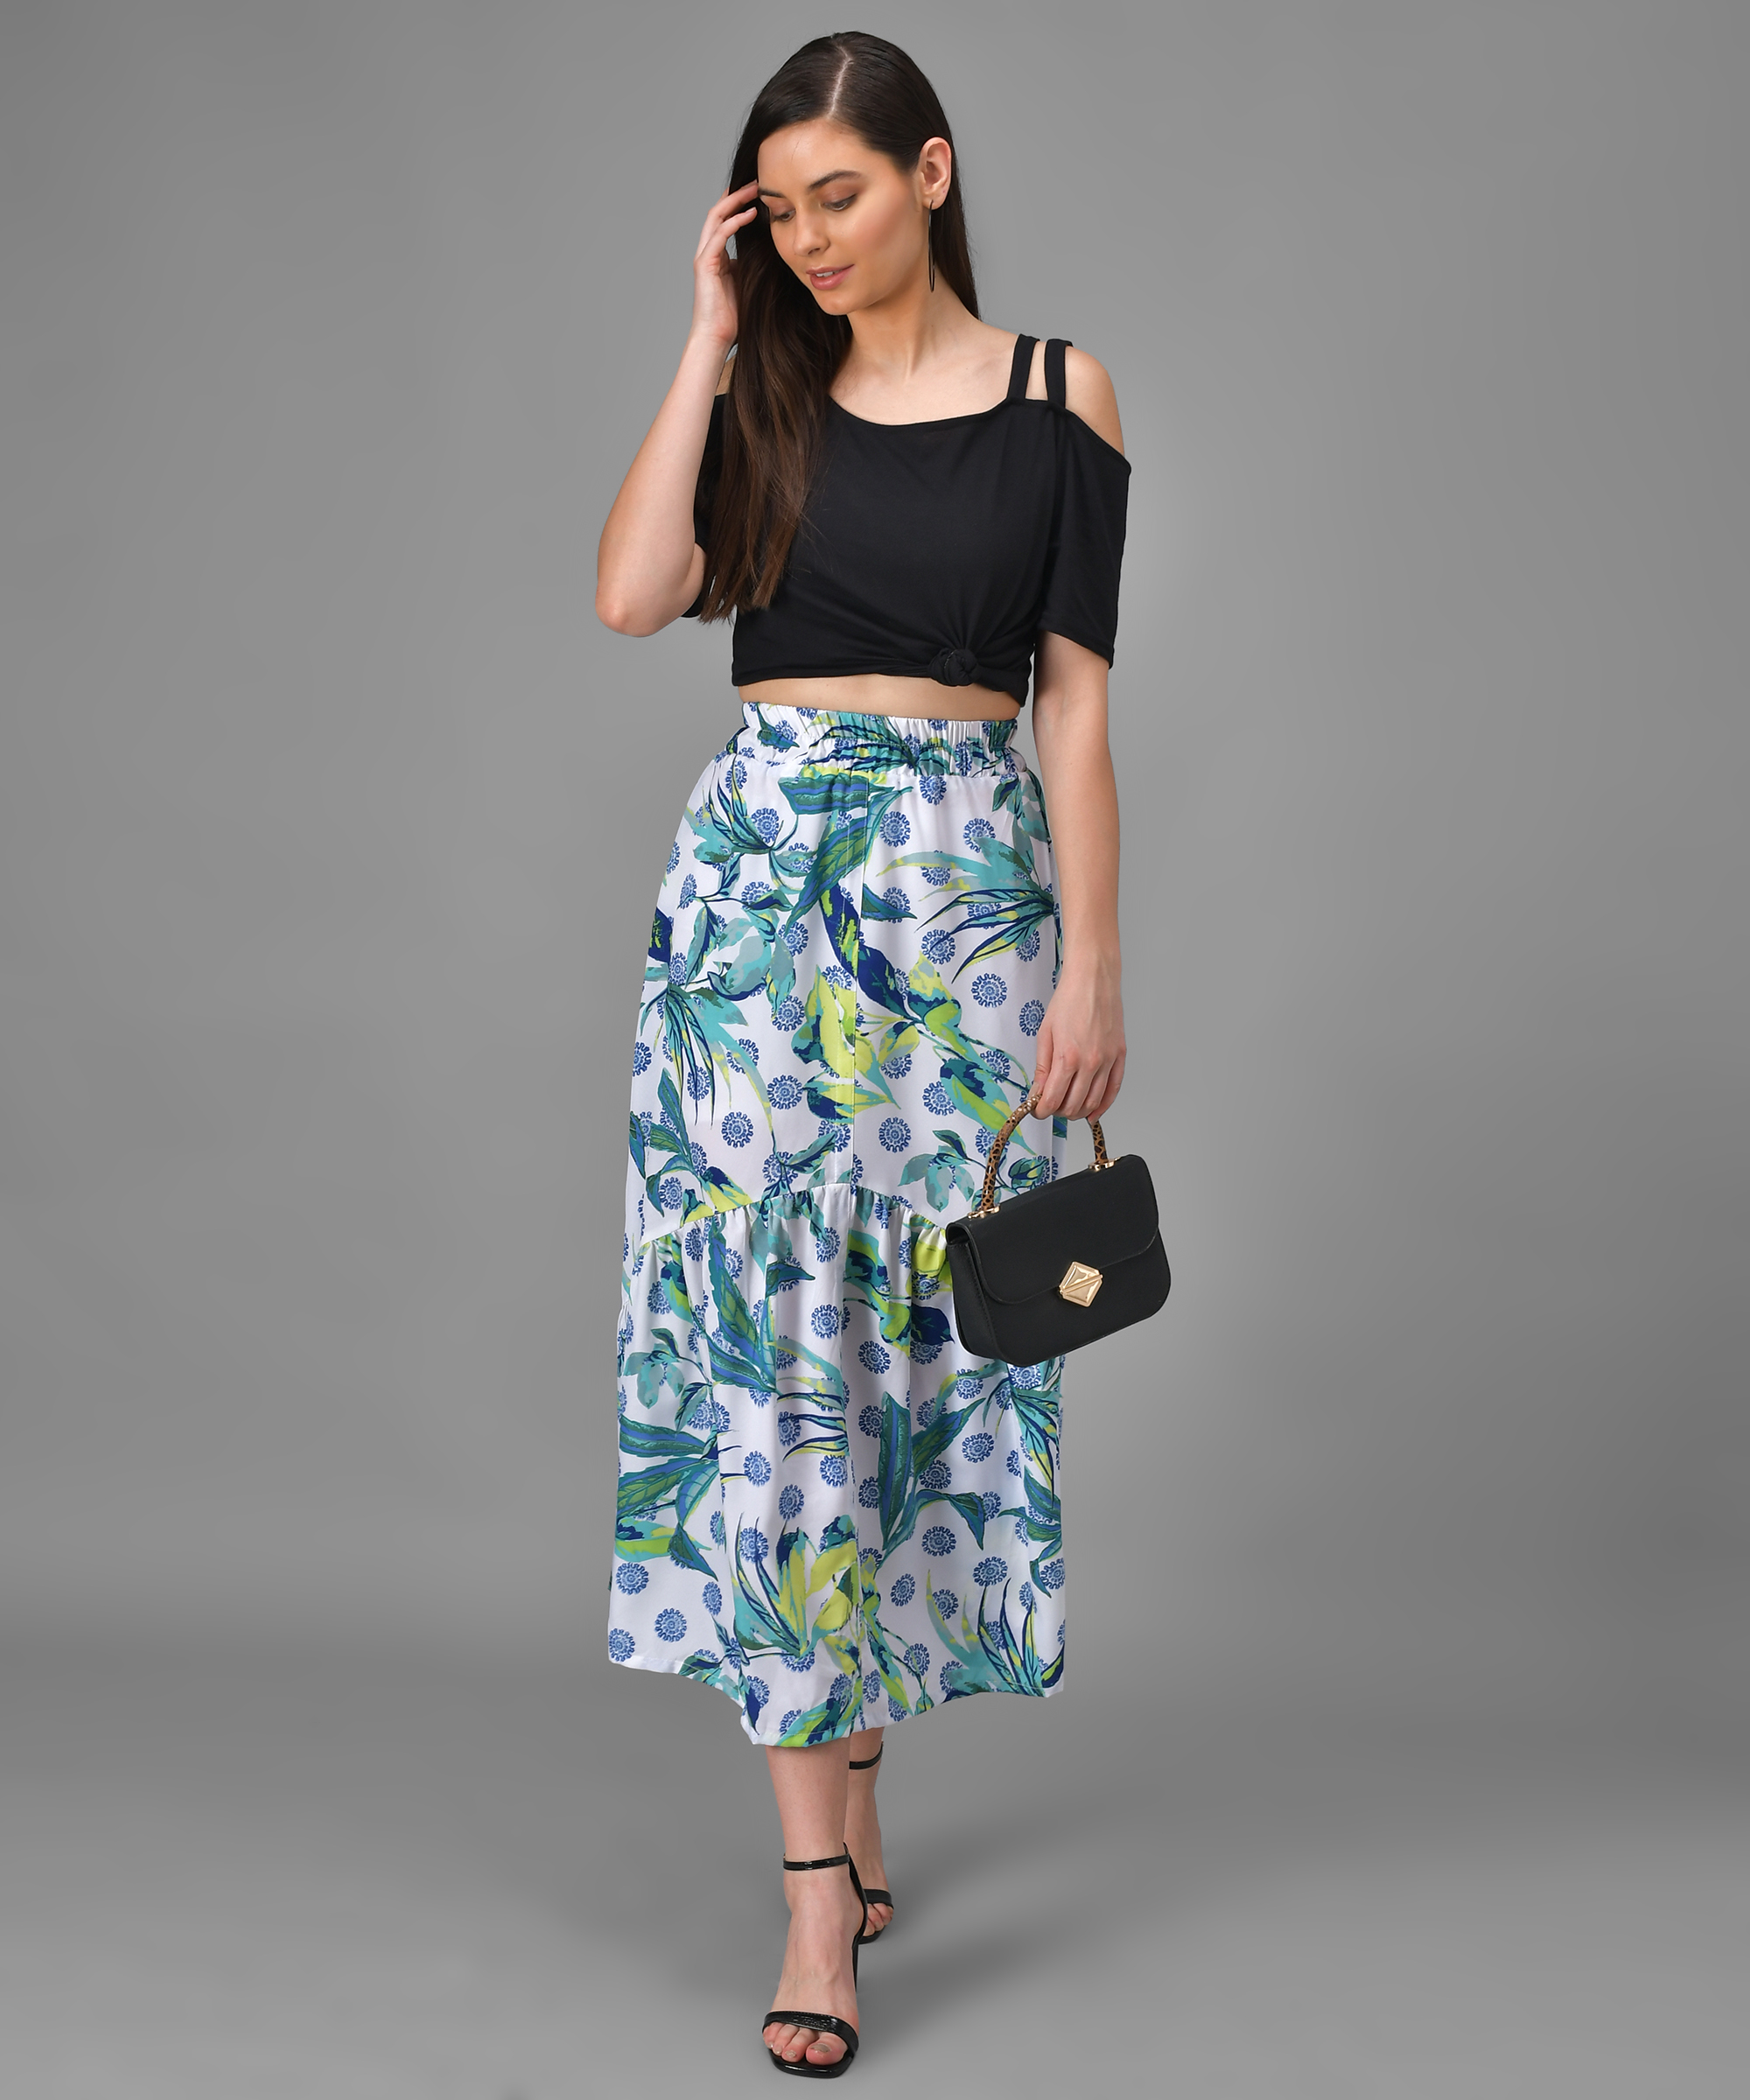 Elizy Women Black Double Stripe Top Floral Printed Skirts